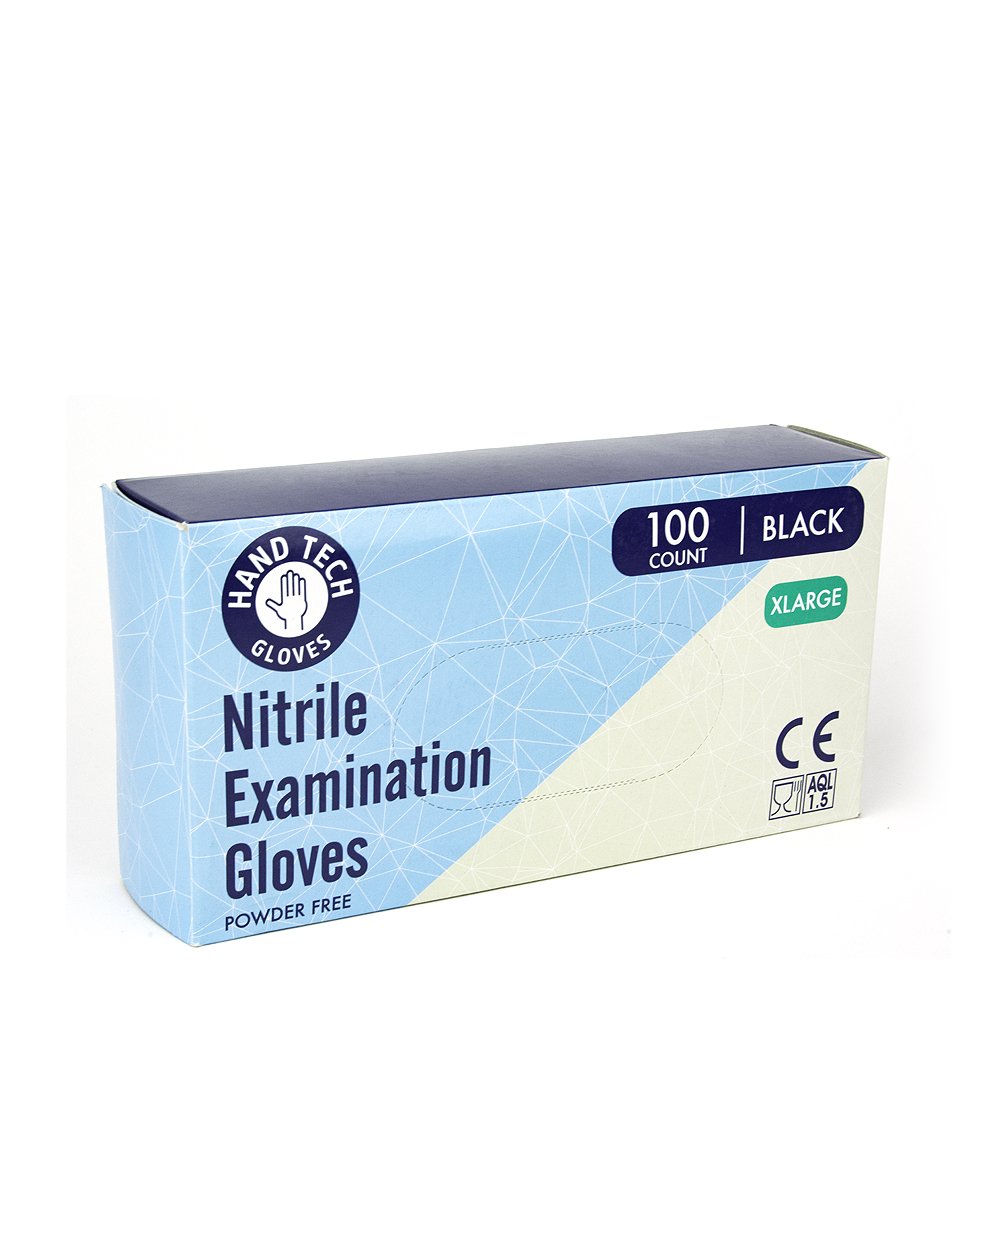 HAND TECH | Powder-Free Disposable Gloves | Black - Nitrile - 100 Count - 7